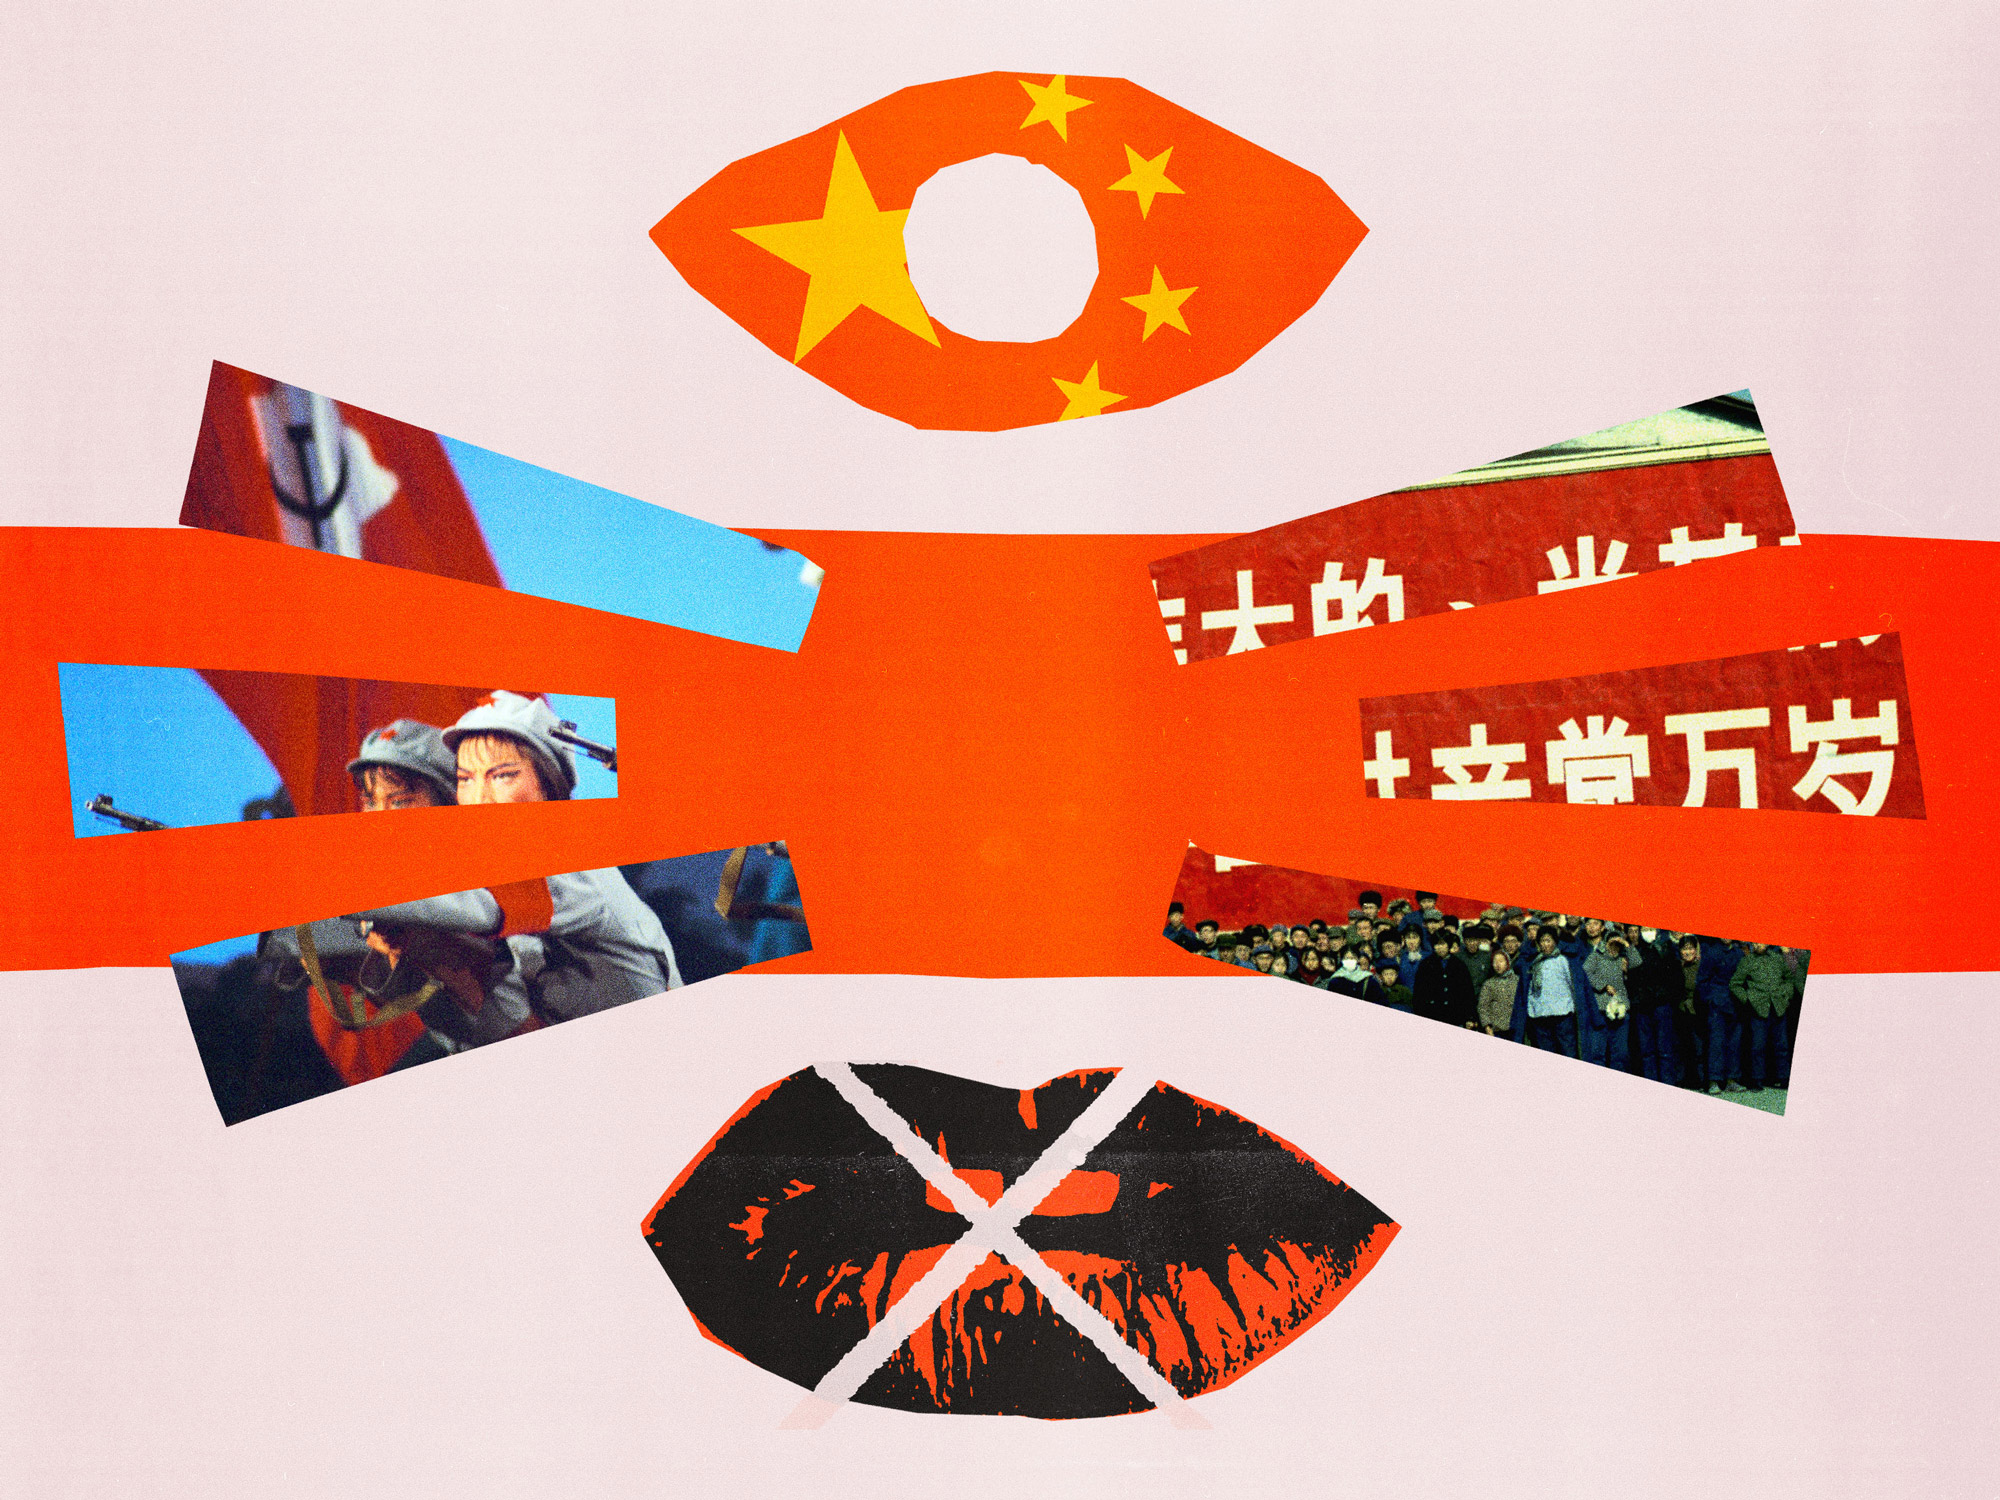 70 Years of the People's Republic of China illustration